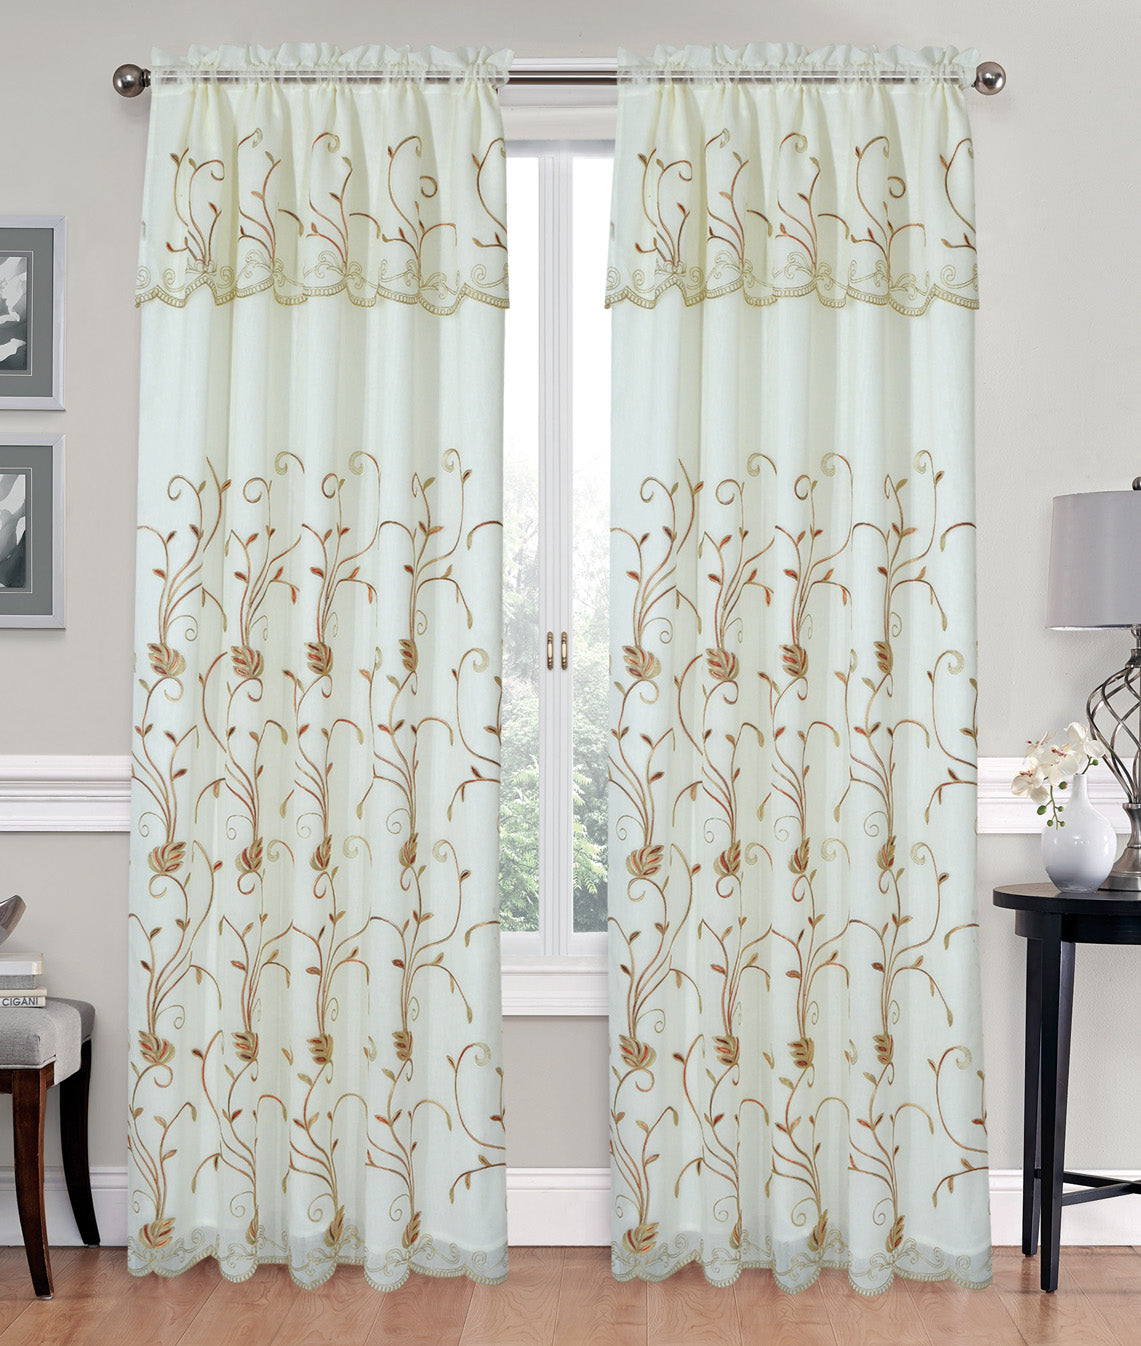 Fiona - Voile Rainbow Embroidered Panel with Valance & Satin backing - Glory Home Design